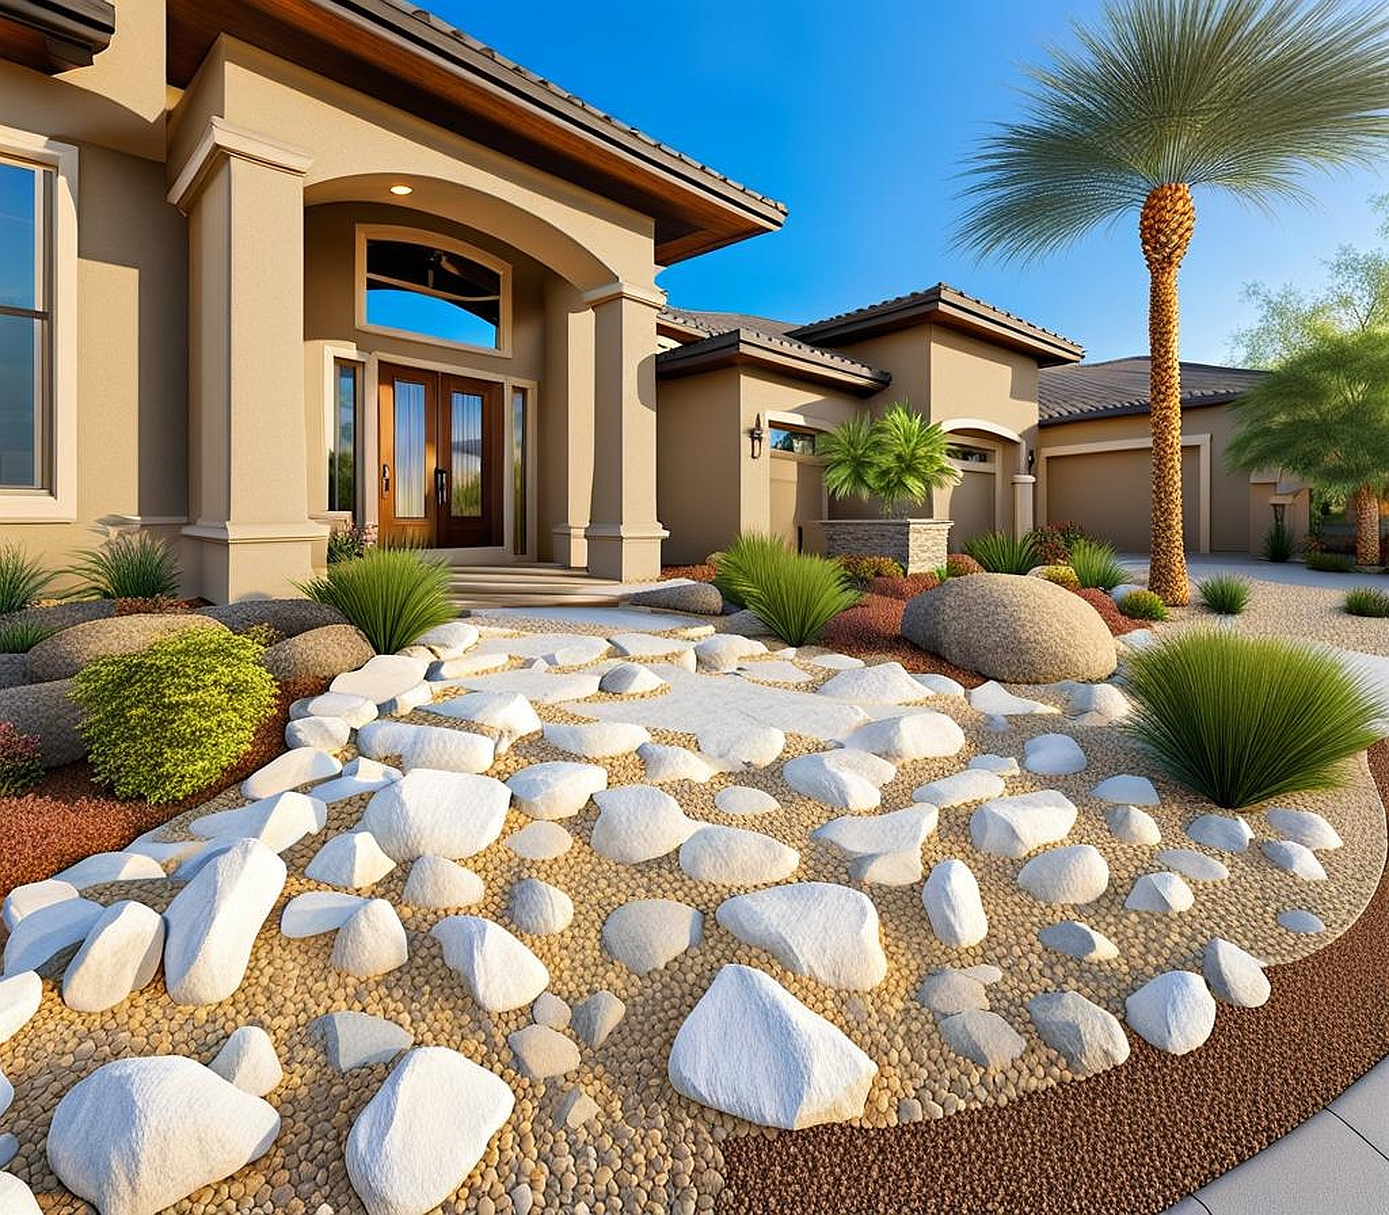 White Rocks Add Unrivalled Texture to Front Yard Landscaping